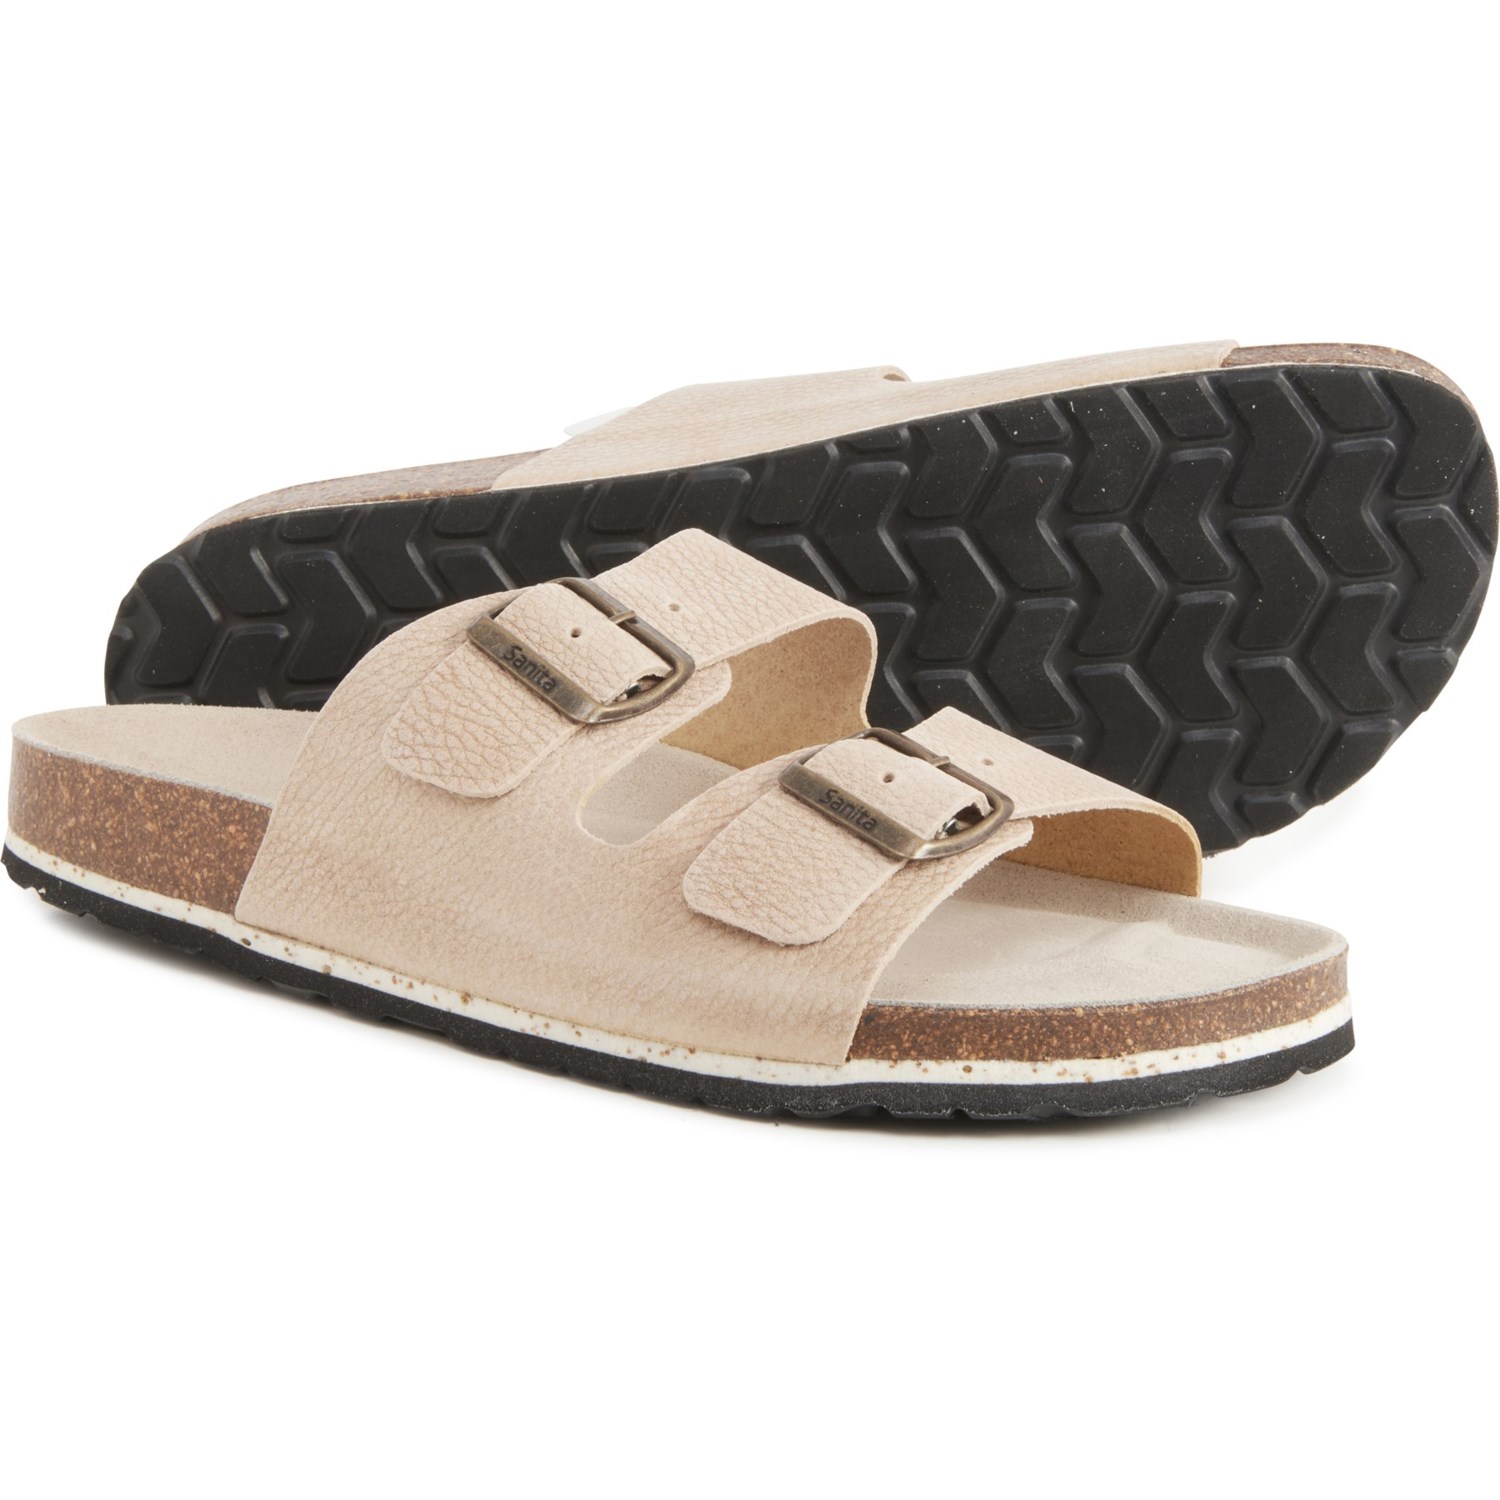 Sanita Made in Spain Ibiza Sandals - Oiled Leather (For Men)